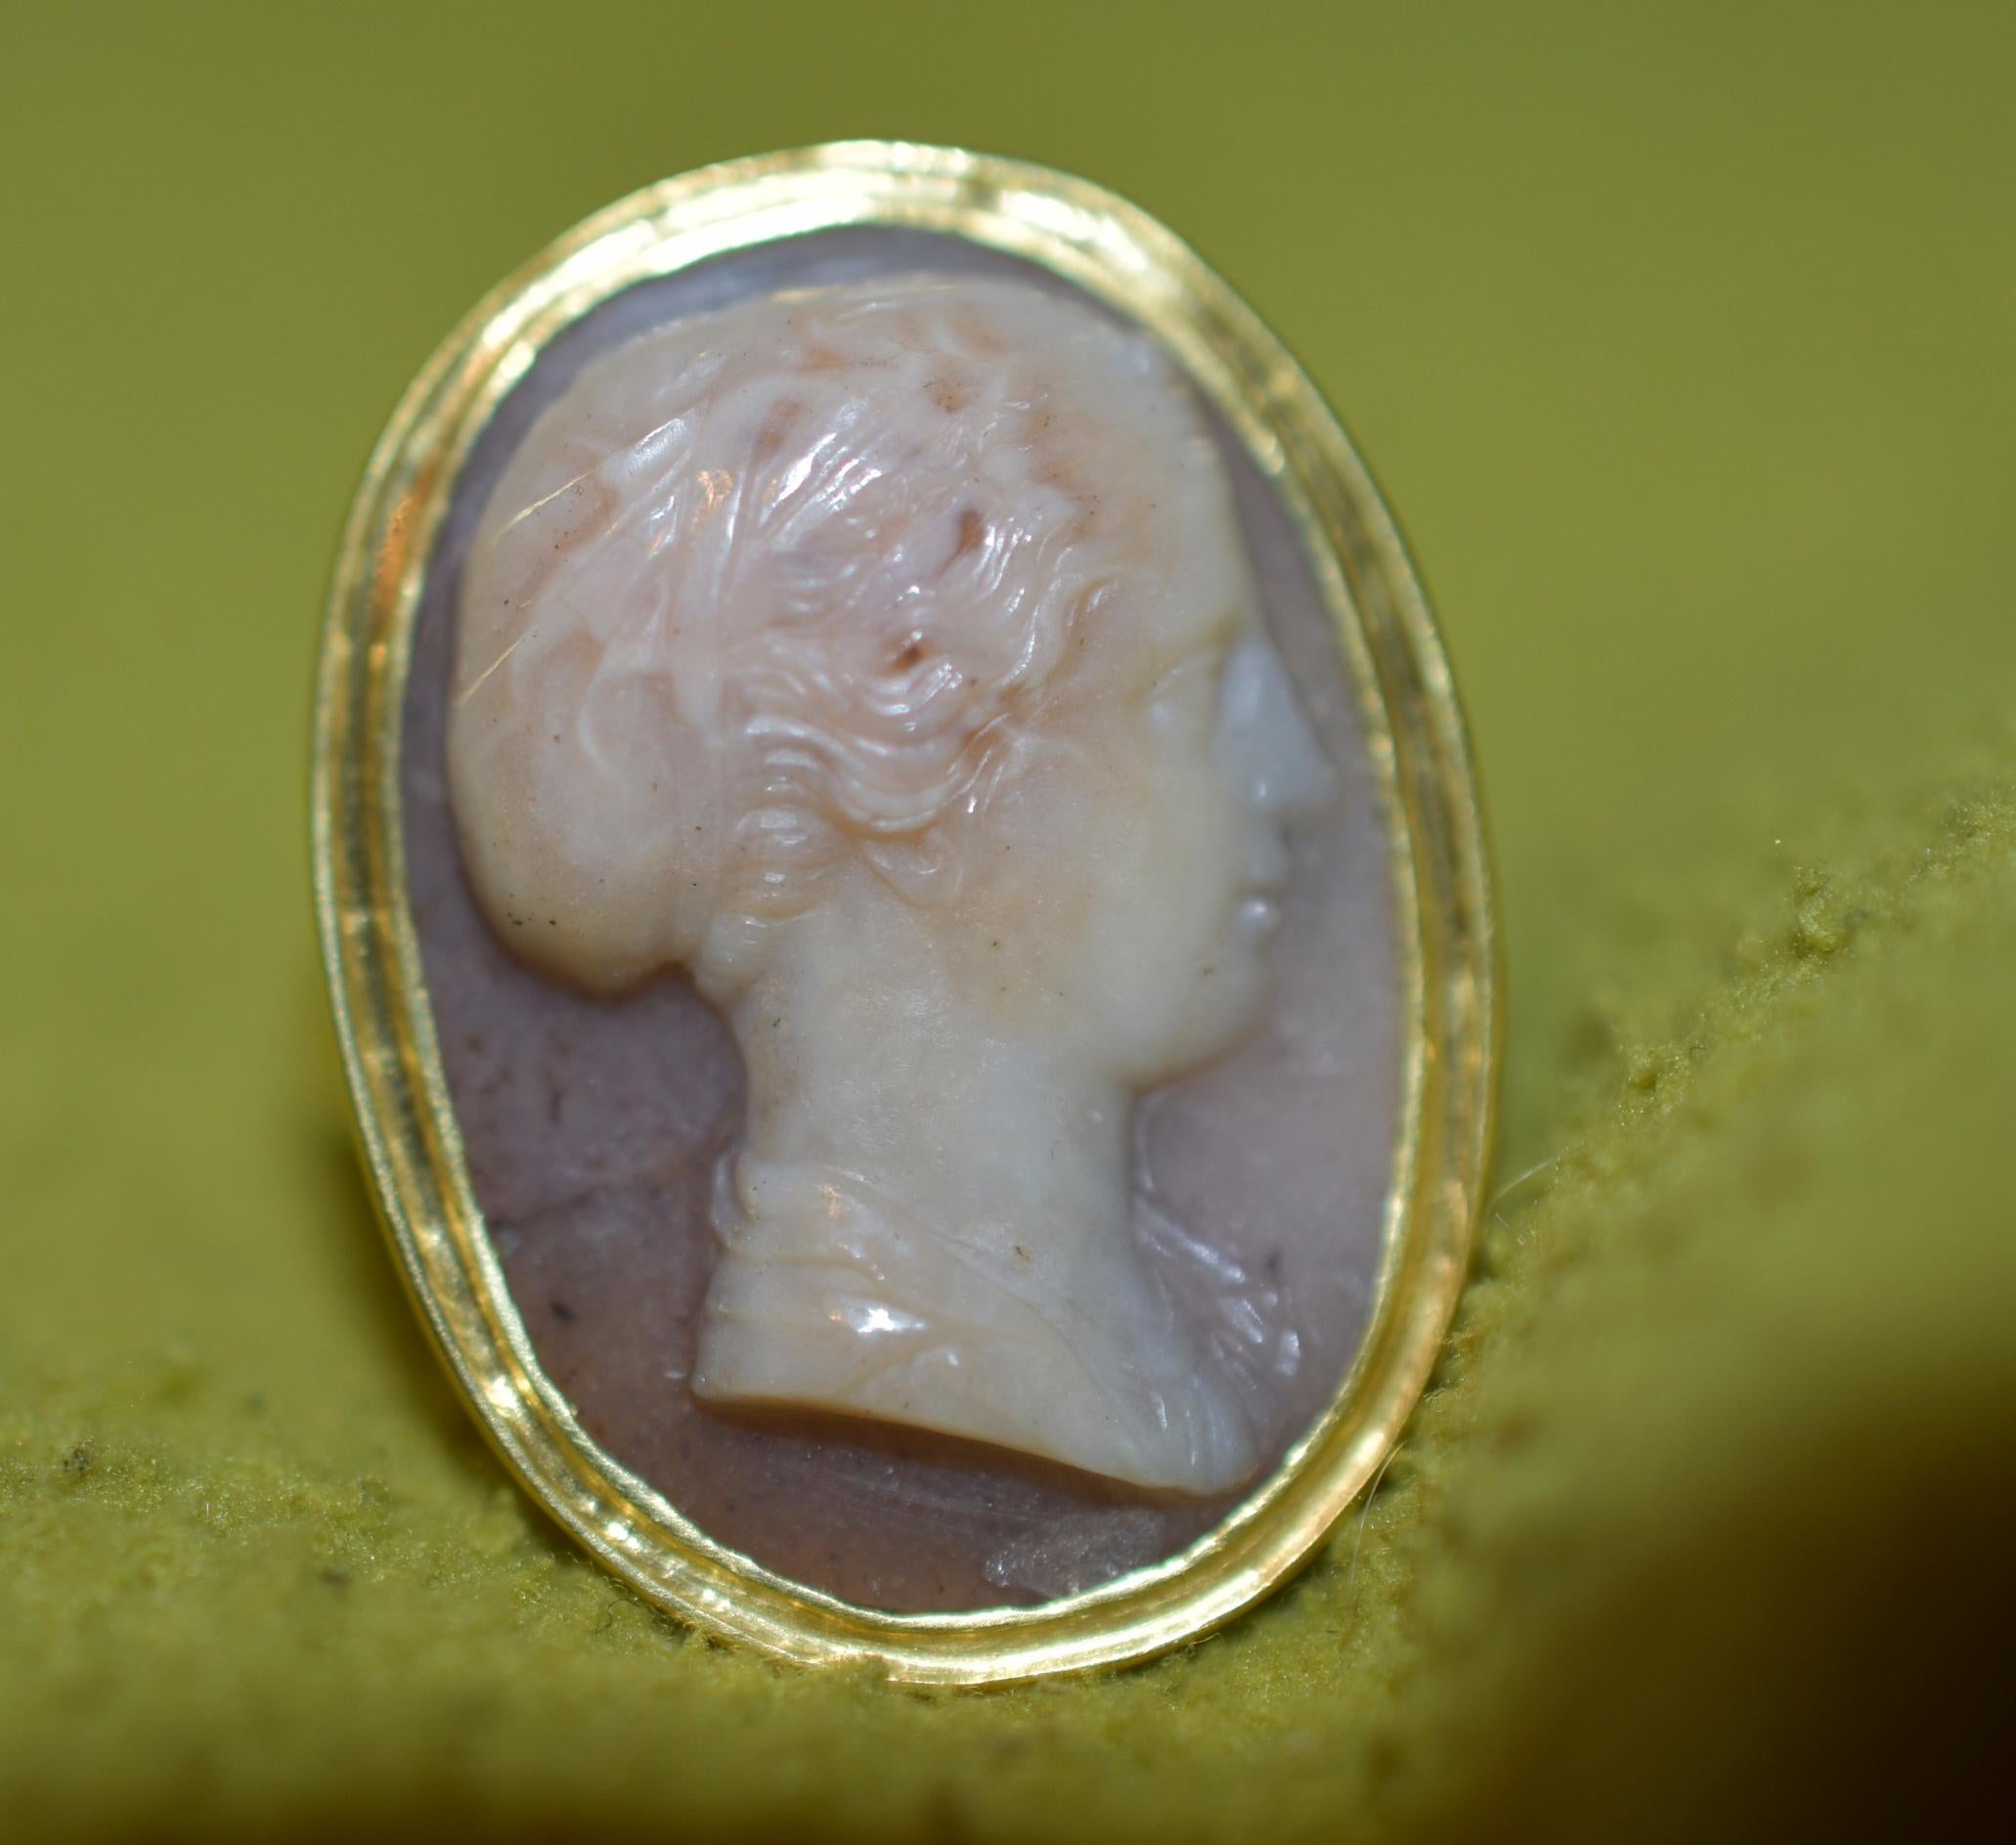 Utilizing the natural features of the blush and gray speckled agate with a lovely mottled appearance and demonstrating the fine carving that this circle of Italian carvers were known for, our ring is a sensitive portrayal of Sappho, an early poetess